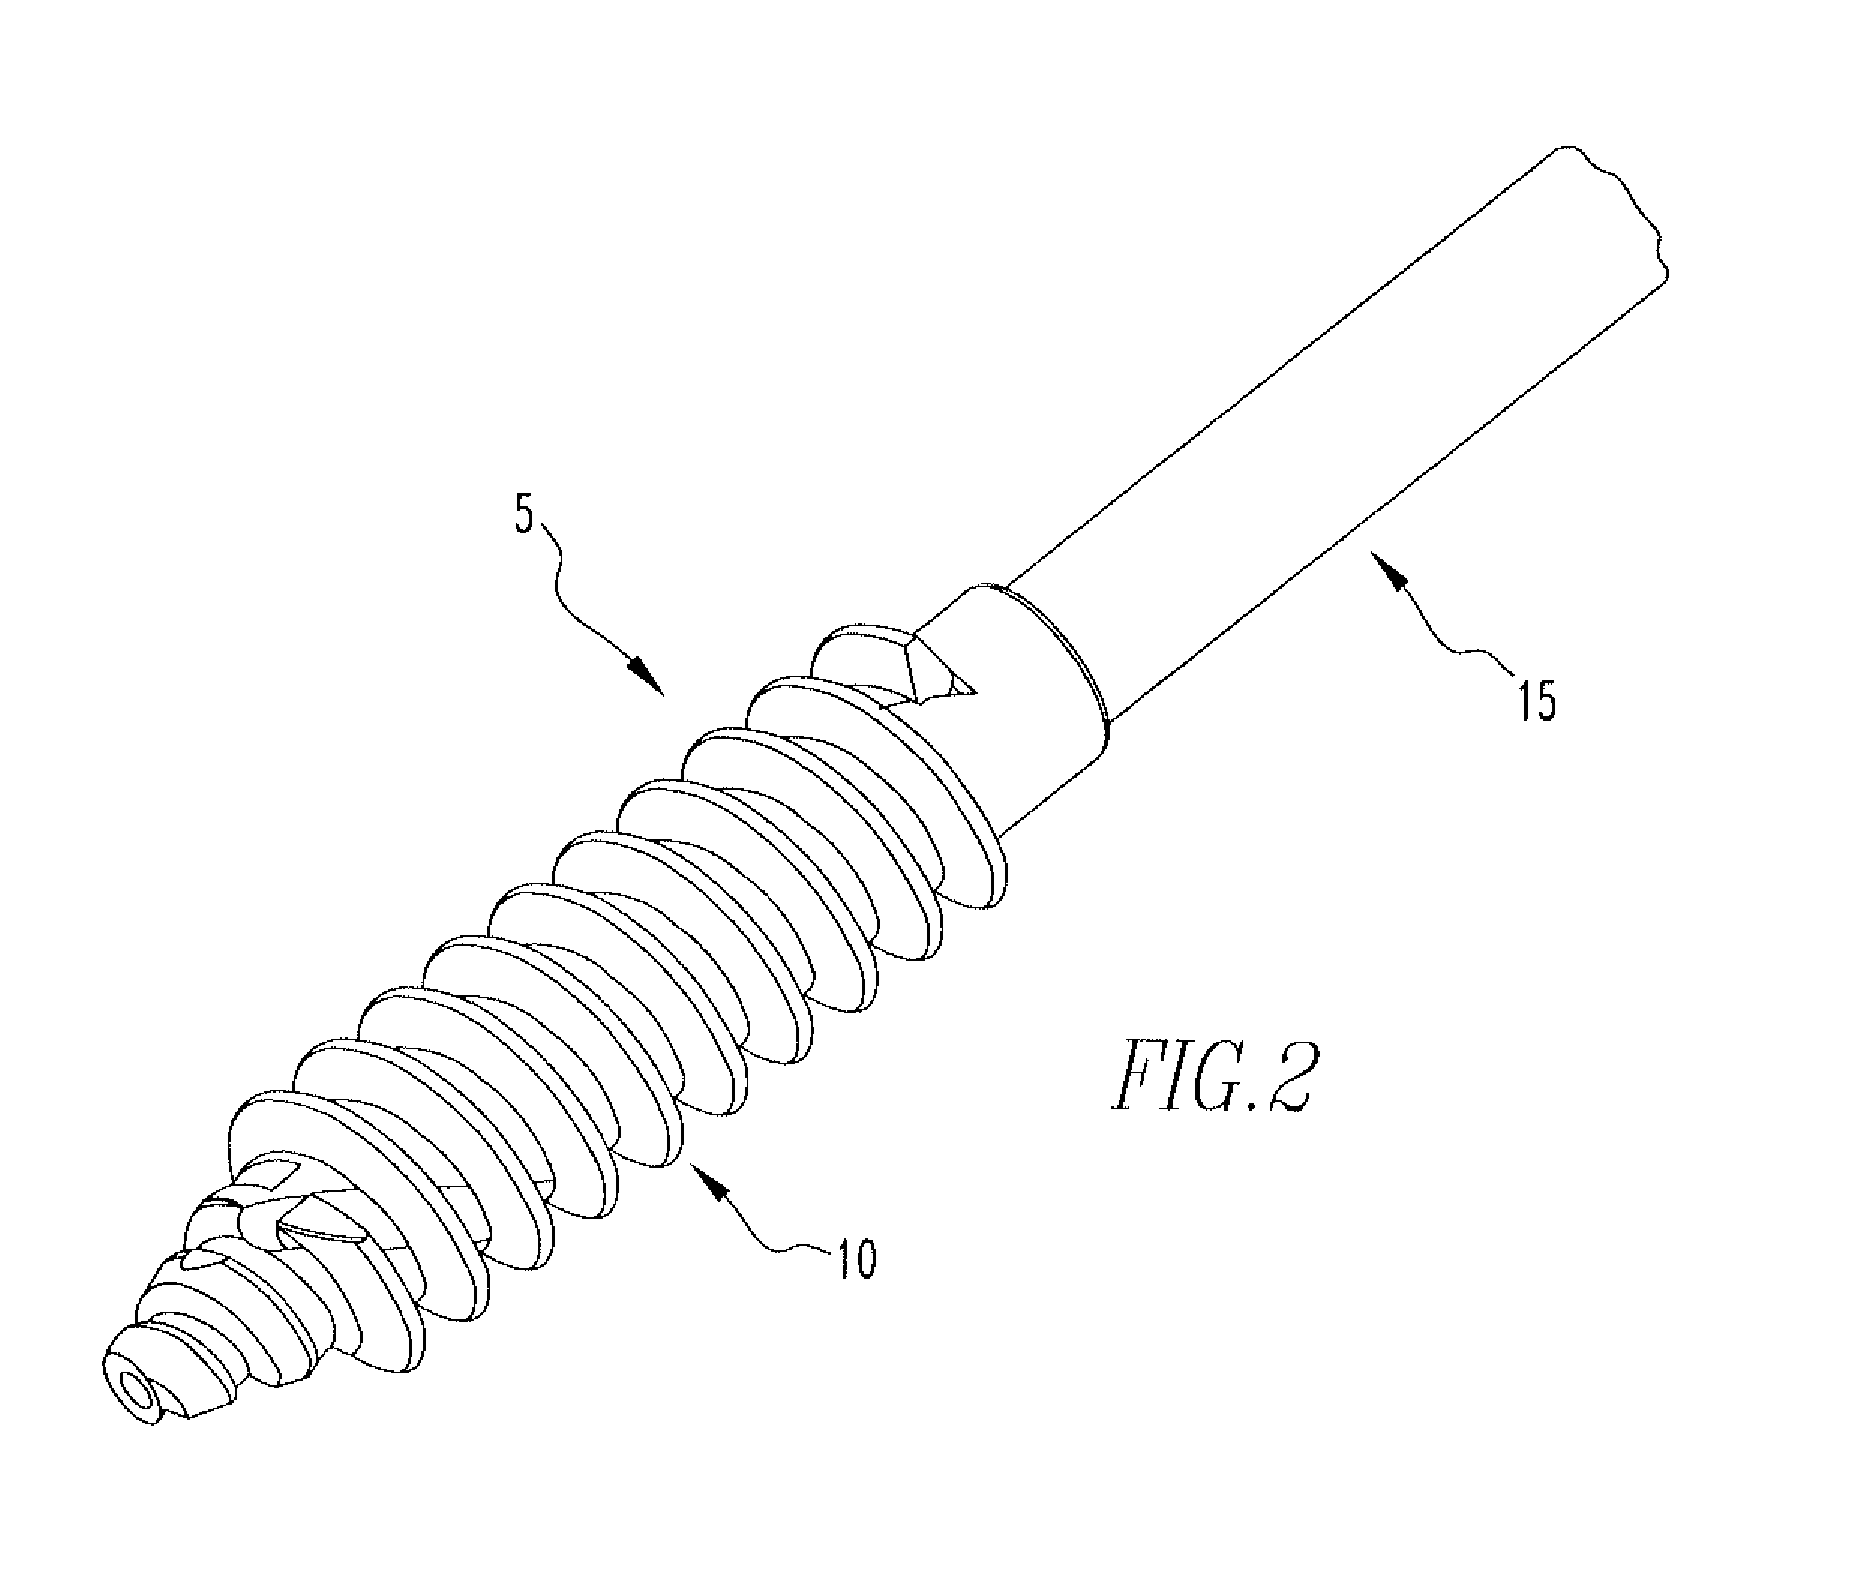 Helicoil interference fixation system for attaching a graft ligament to a bone